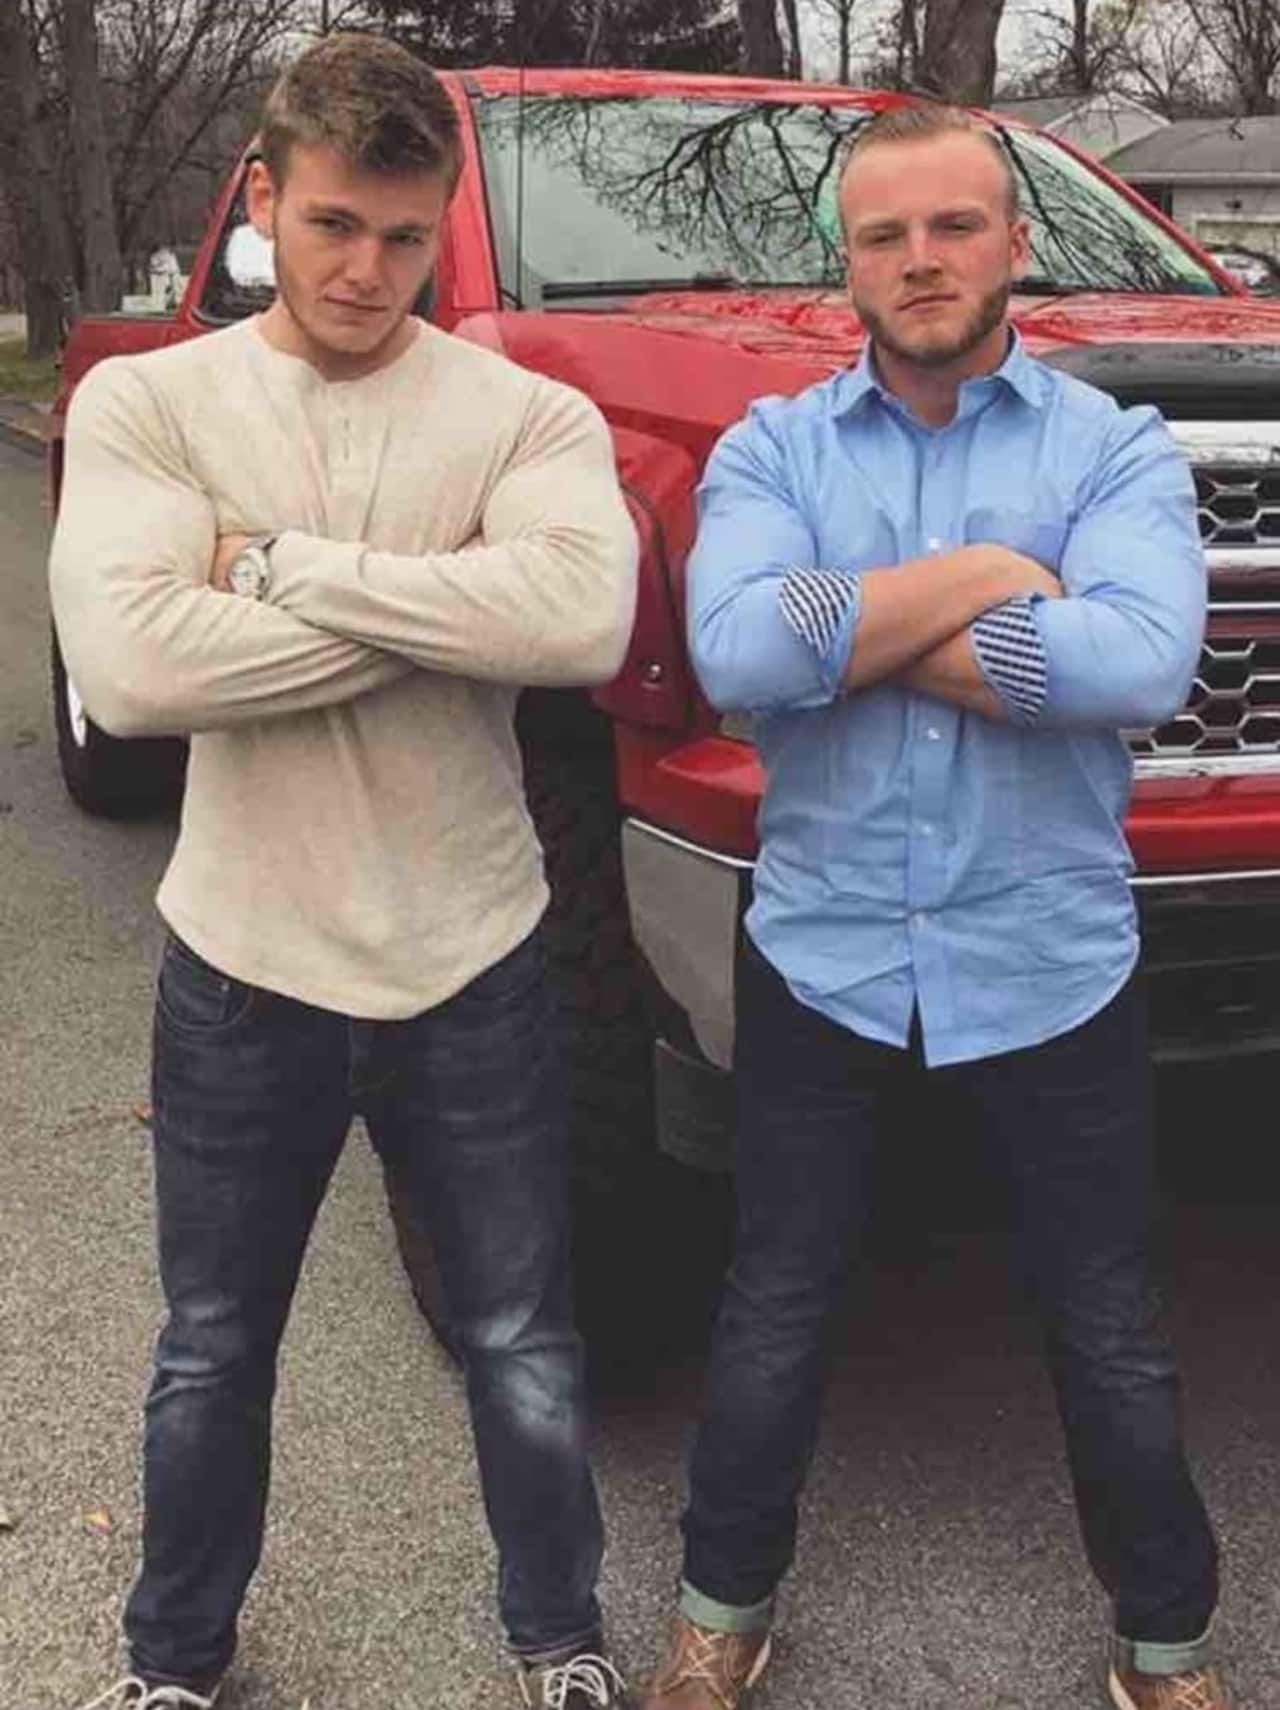 A GoFundMe page has been set up for Randy 'Big Rands' Wachter (L), pictured here with brother Dustin.